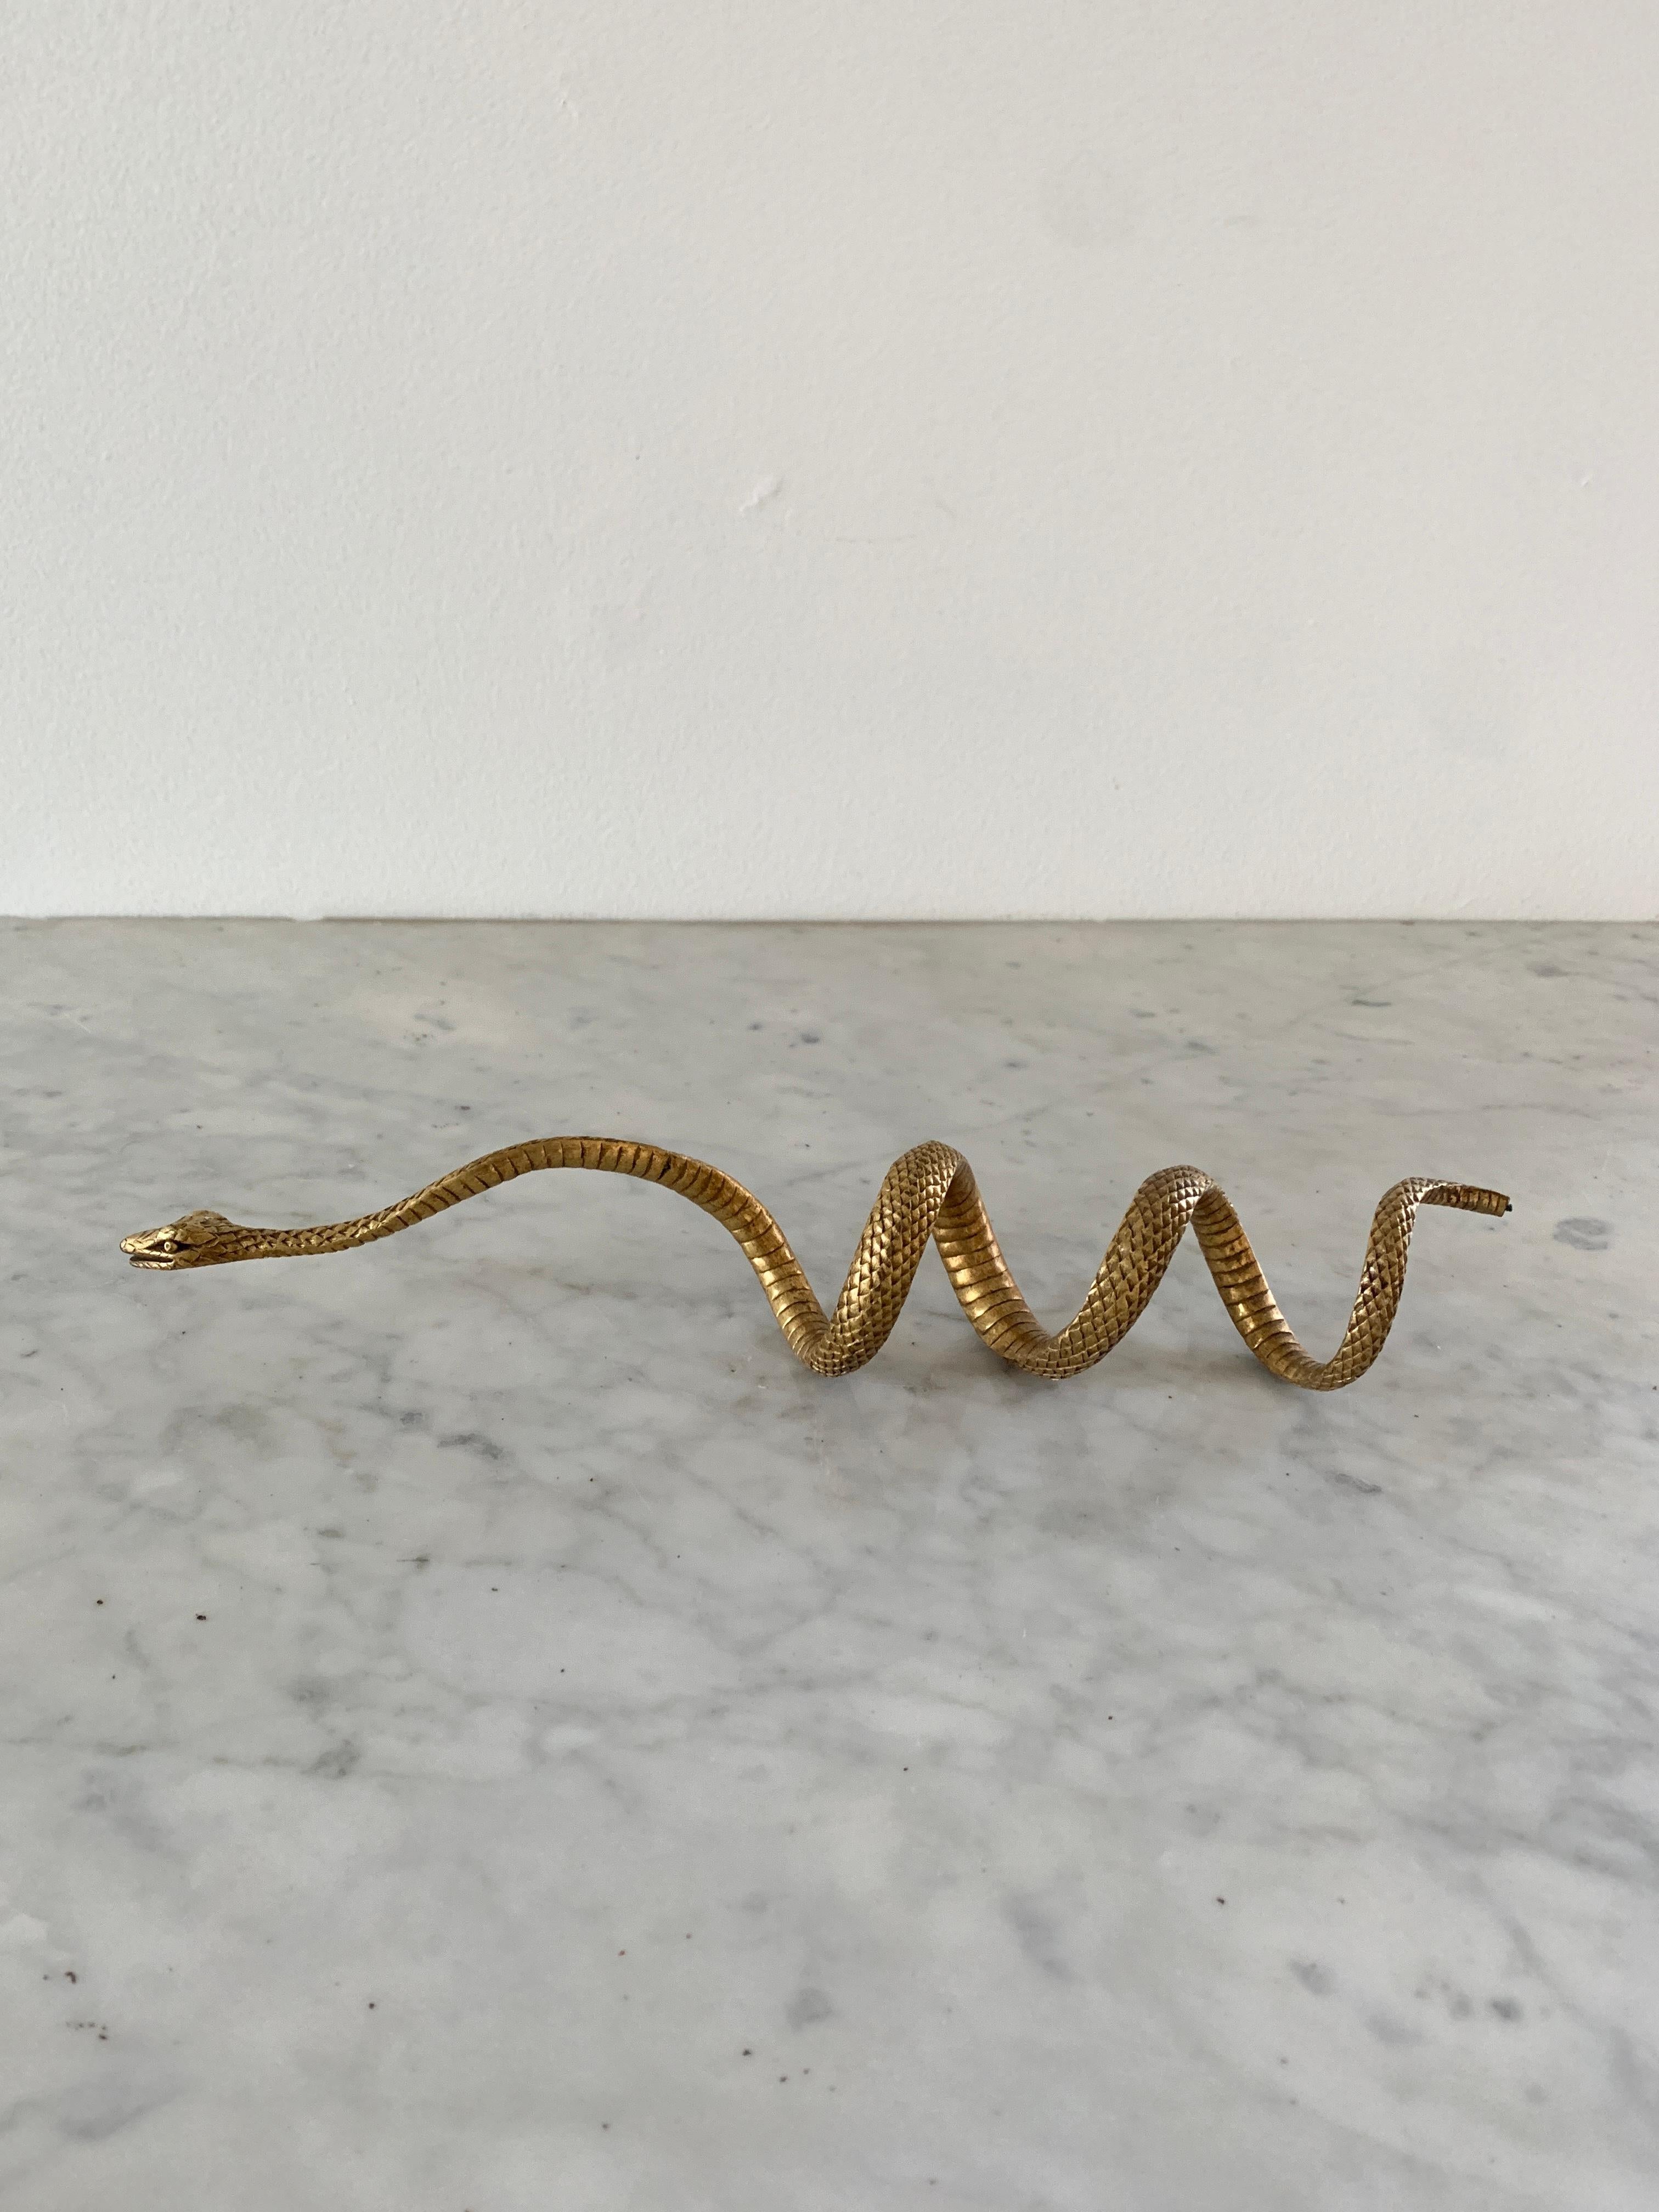 coiling snake